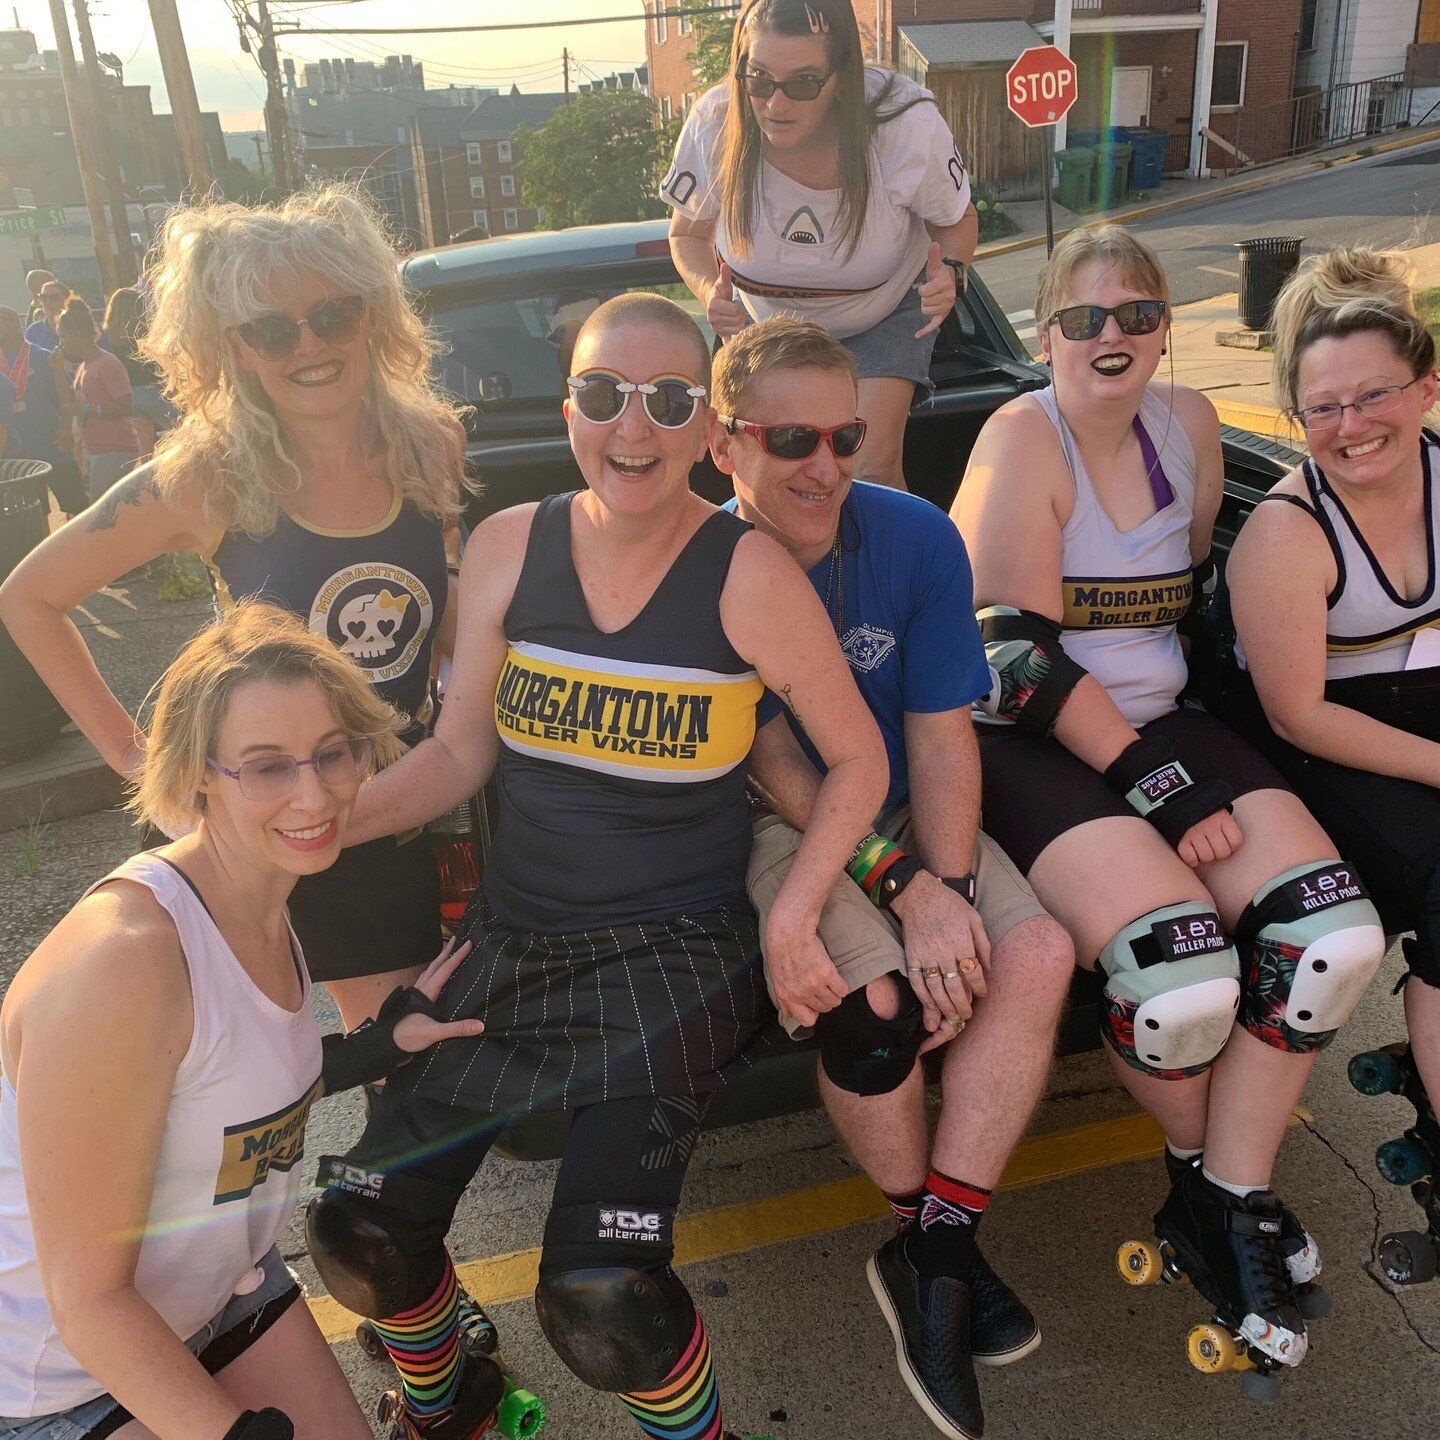 MRD had a great time skating in the Monongalia County Fair parade. If we threw a flyer at you, visit our bio for a link to an interest form -- we'll get in touch!